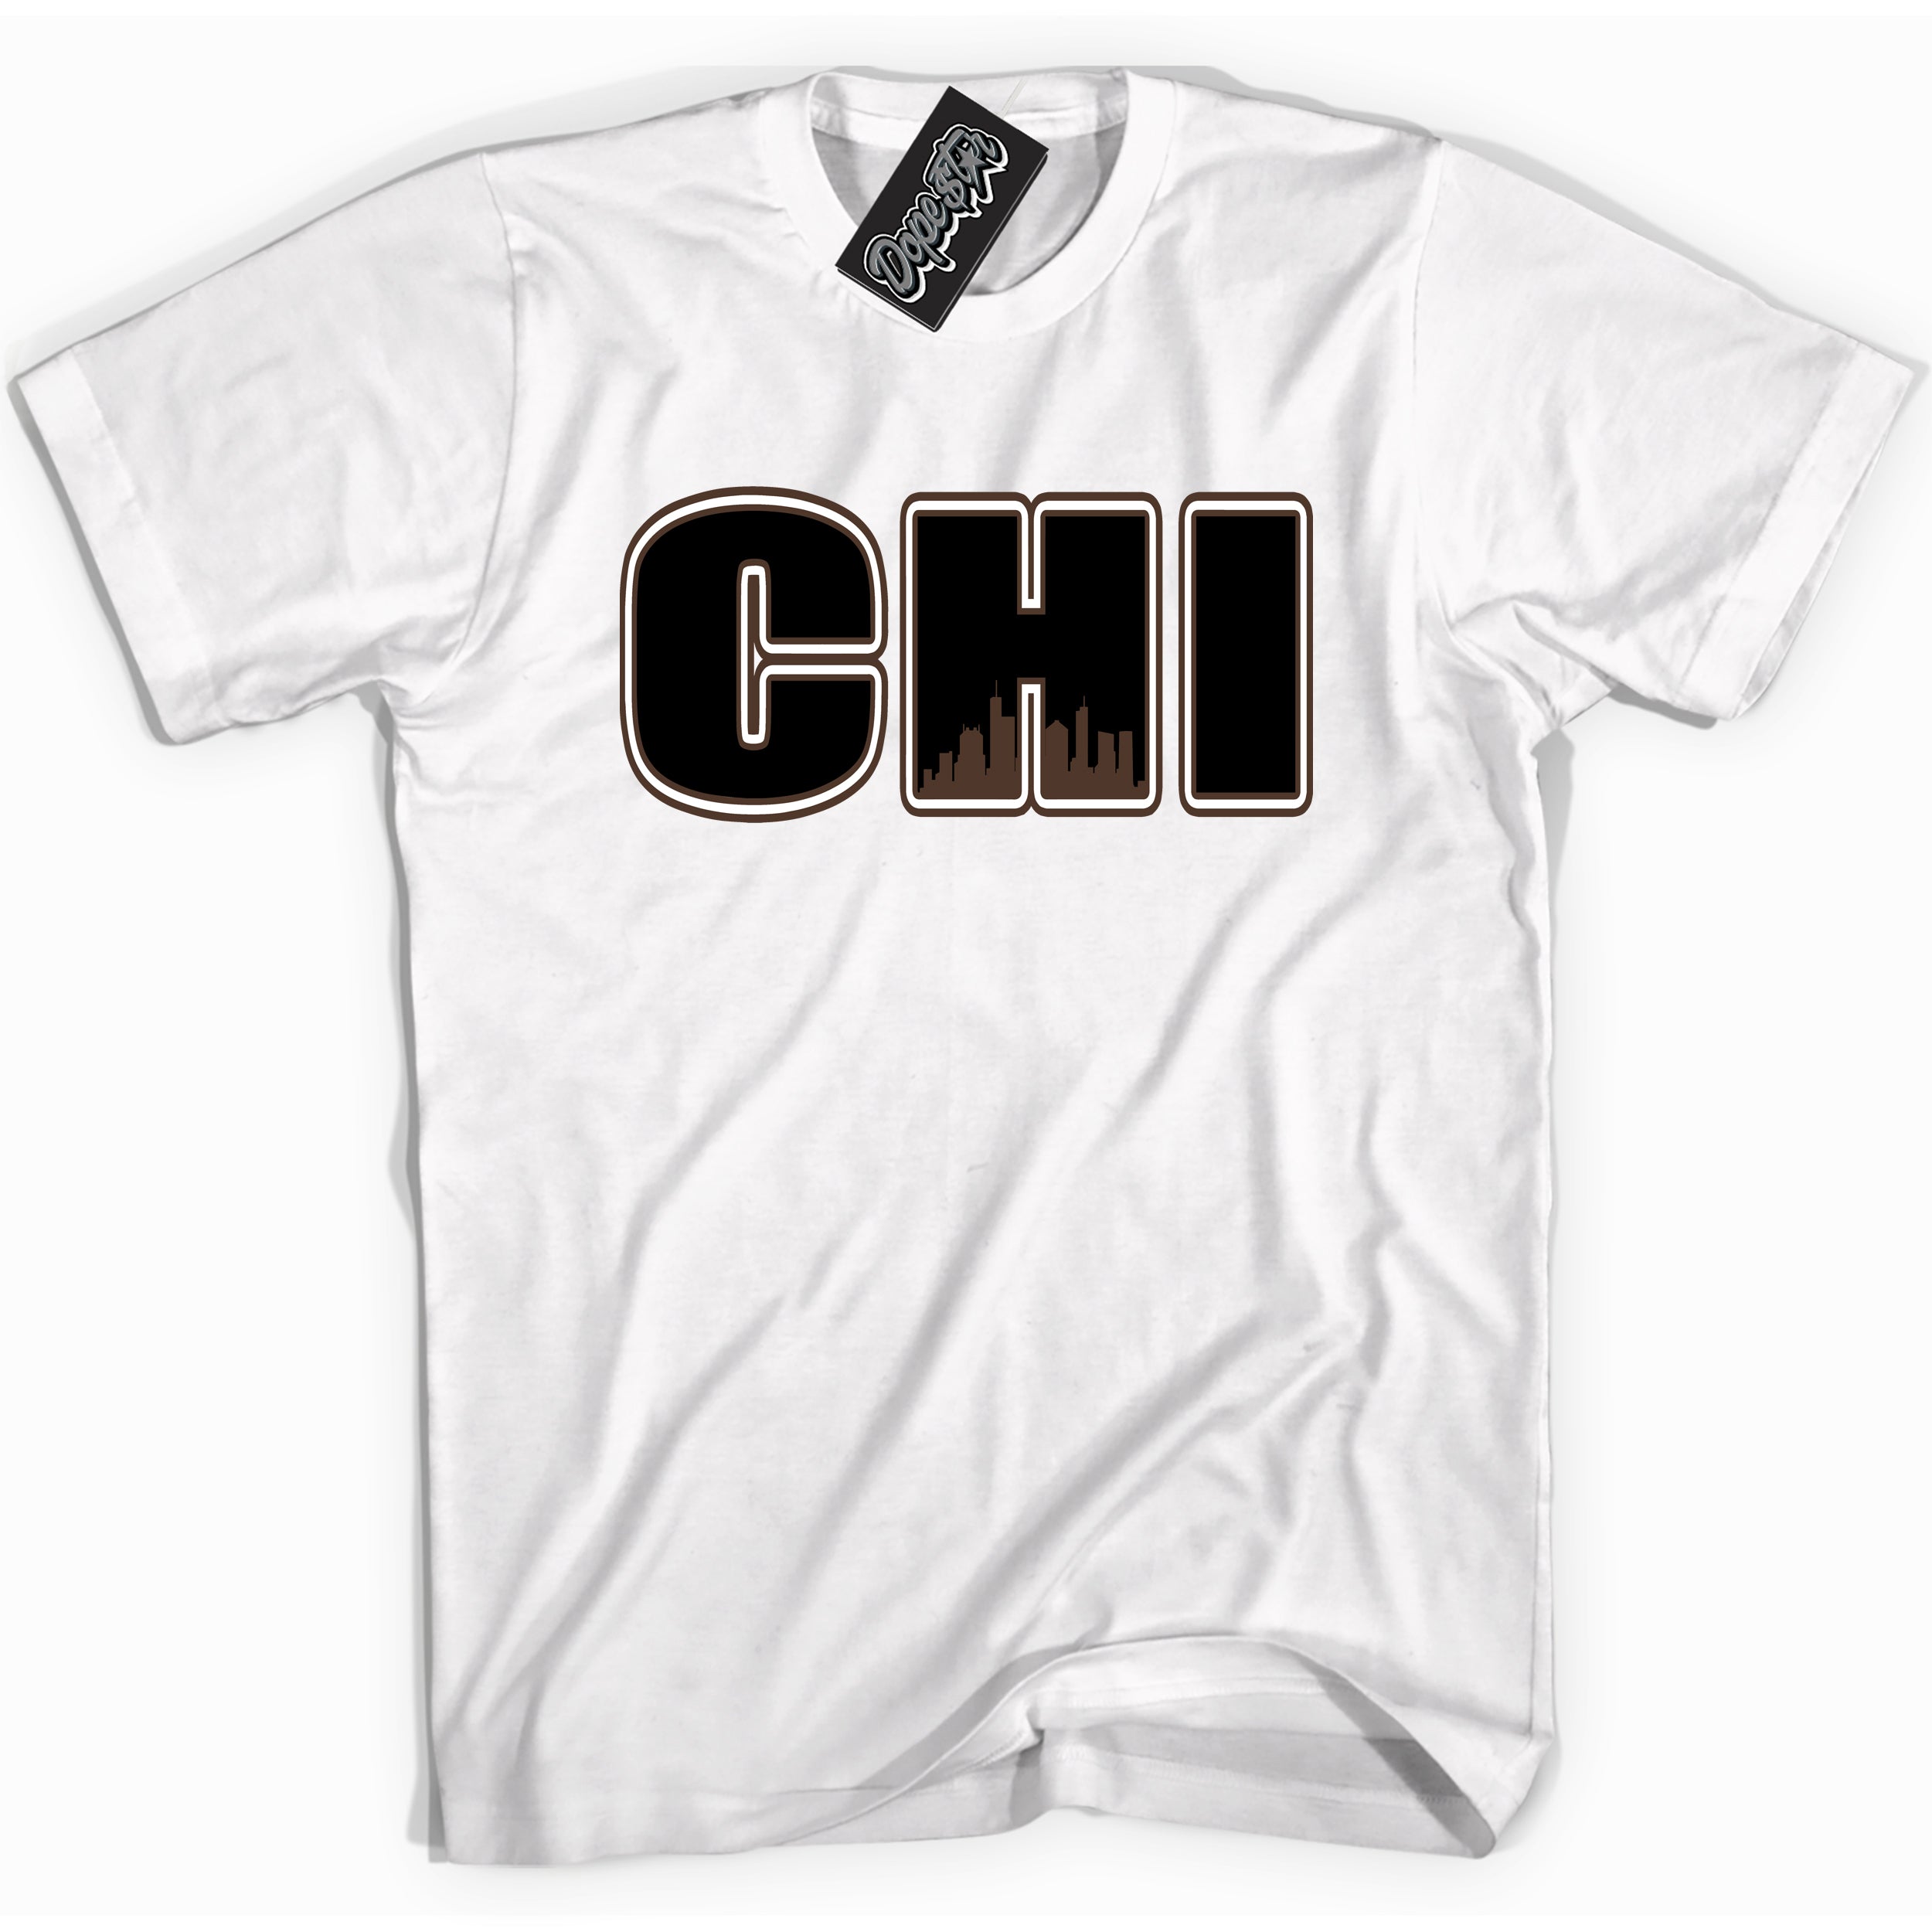 Cool White graphic tee with “ Chicago ” design, that perfectly matches Palomino 1s sneakers 